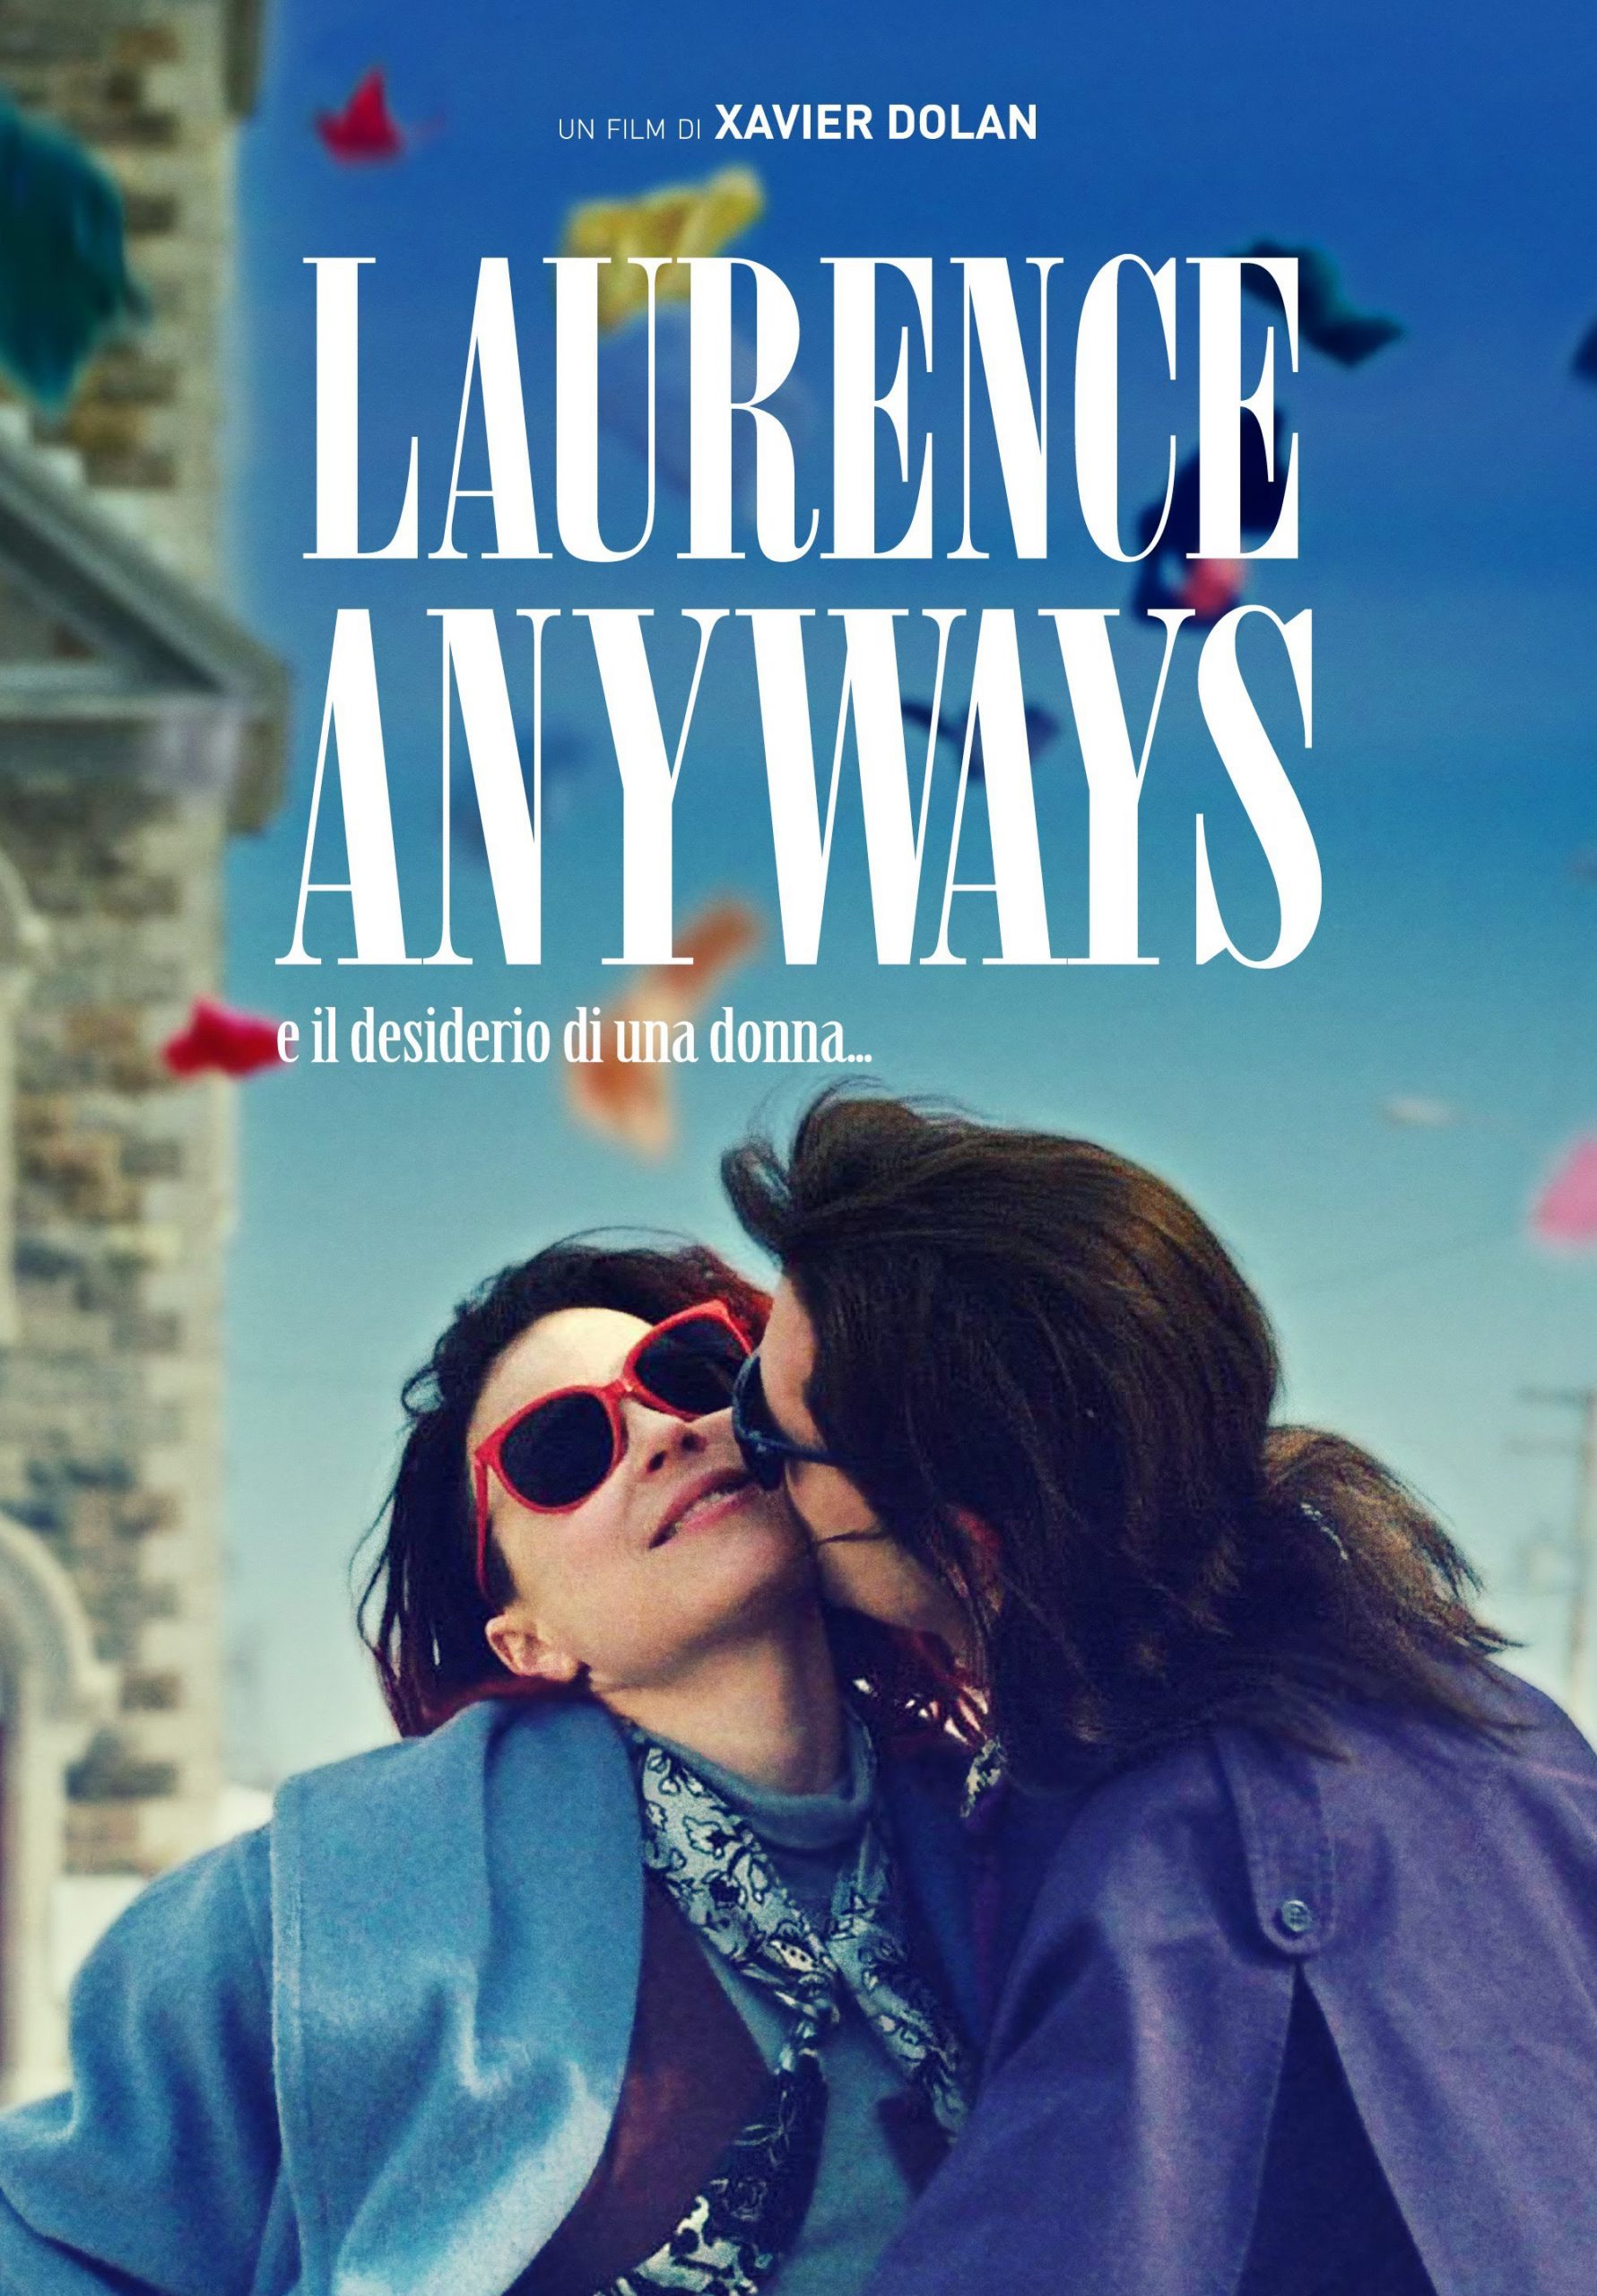 Laurence Anyways [HD] (2016)